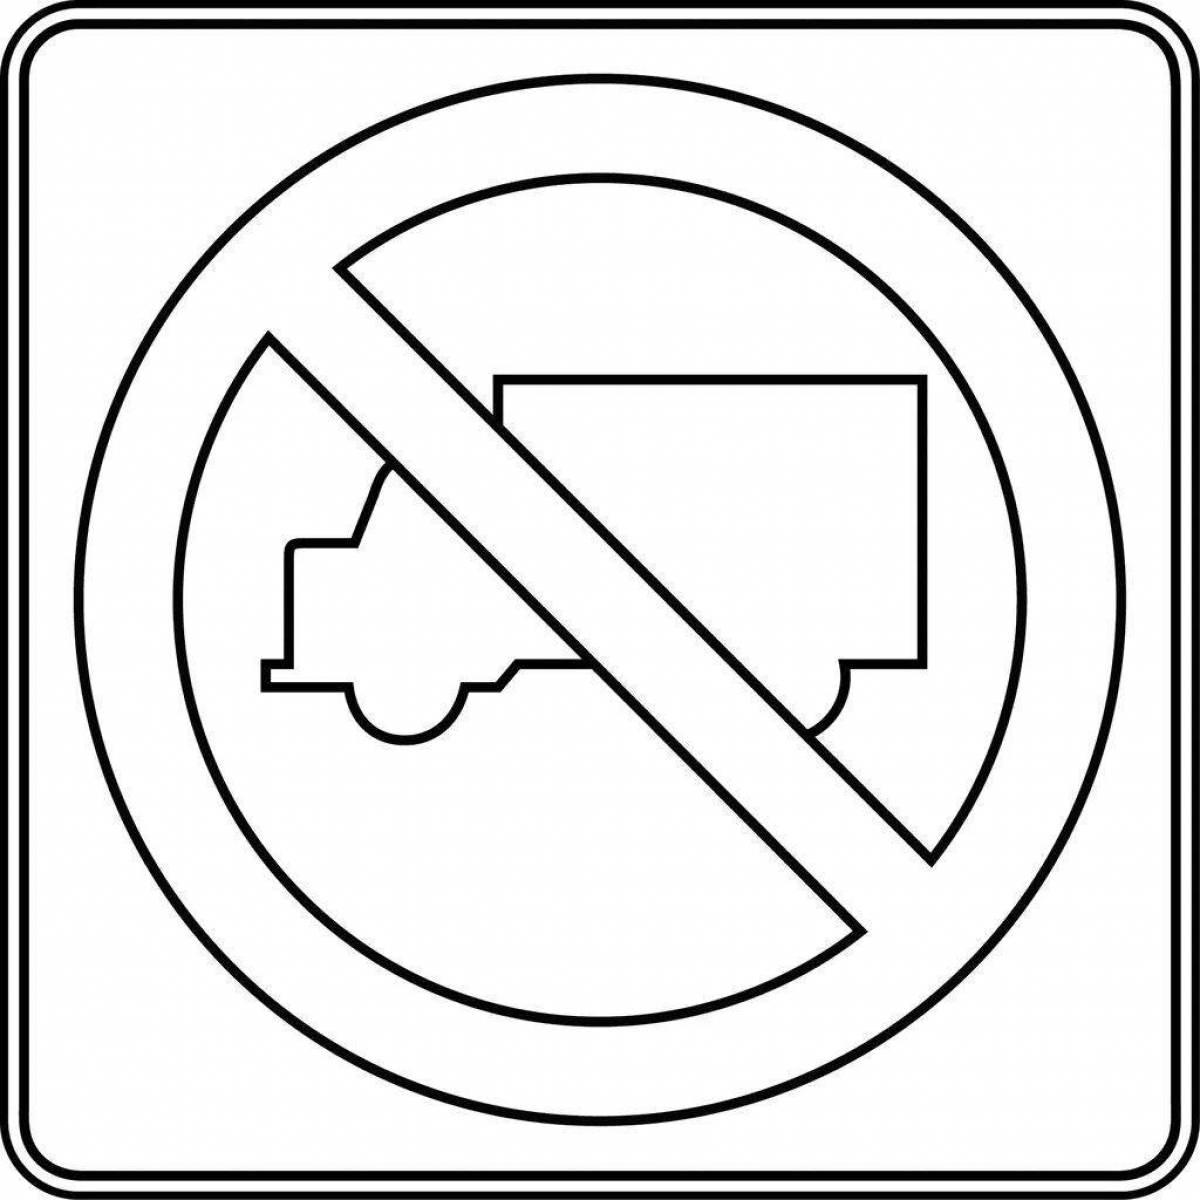 Coloring page hypnotic prohibition road sign